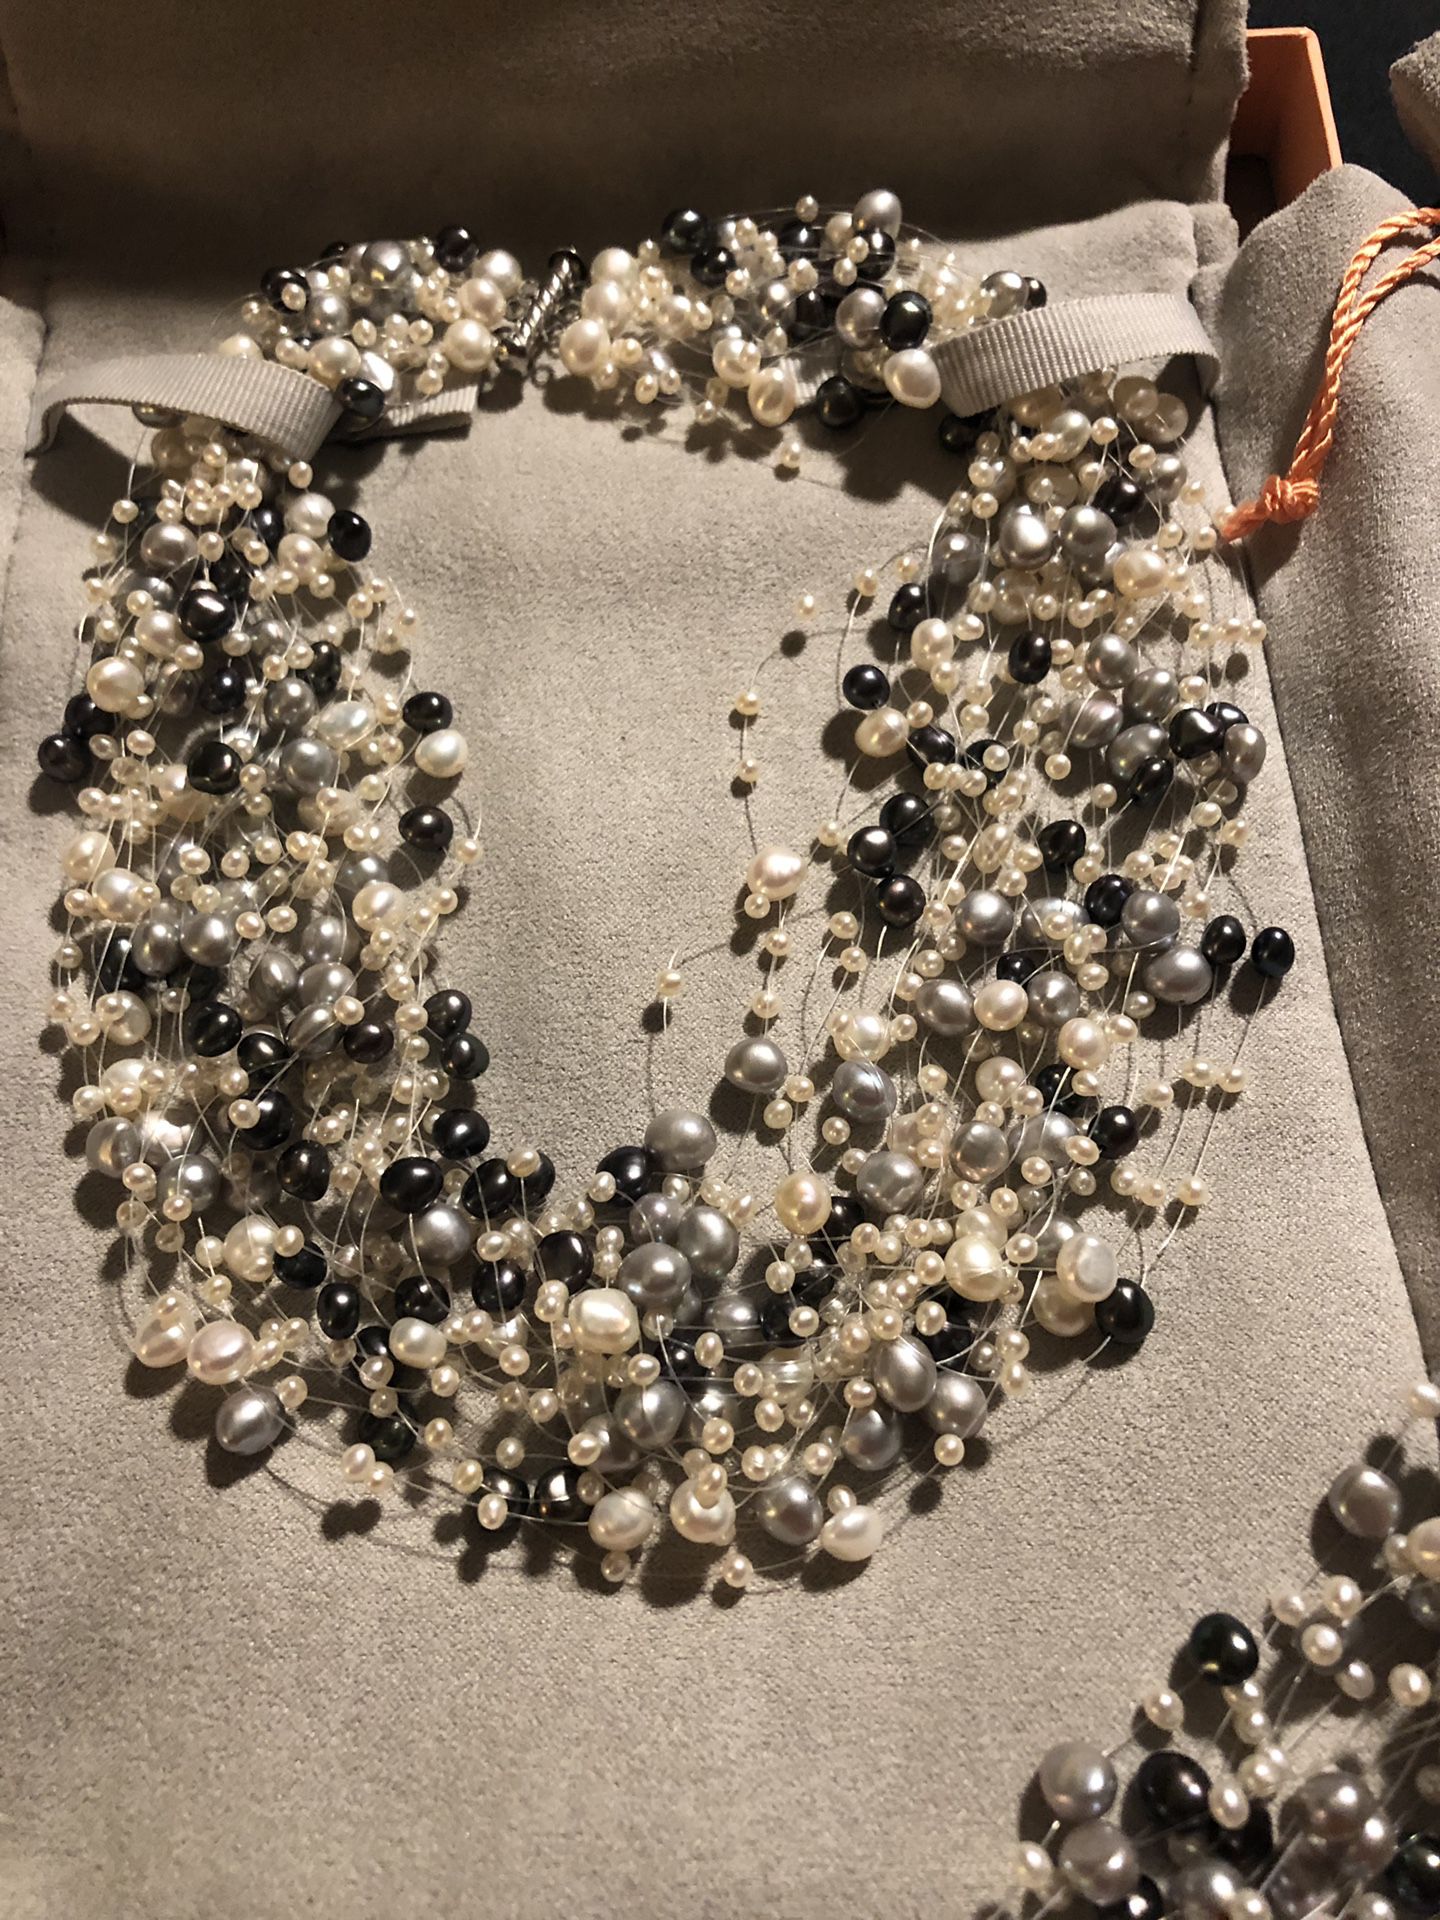 Tiffany Iridesse pearl necklace and bracelet.